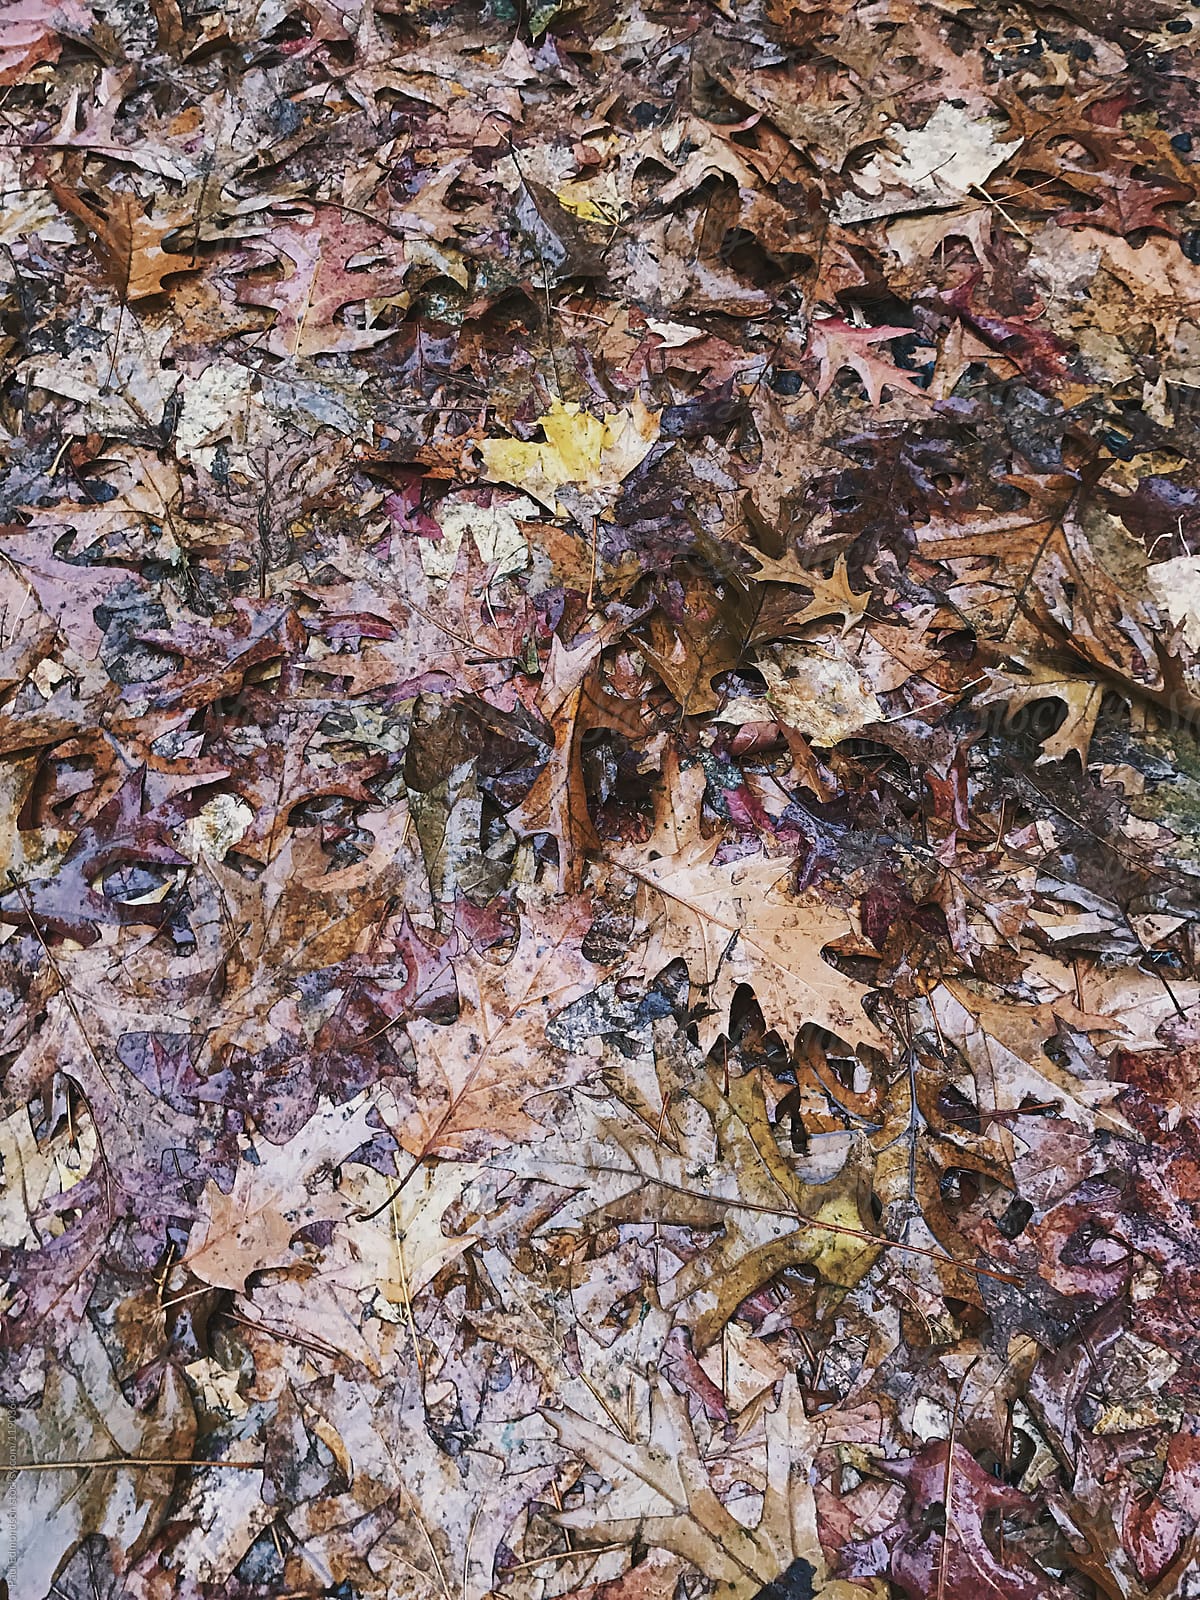 Wet Leaves In Autumn By Stocksy Contributor Rialto Images Stocksy